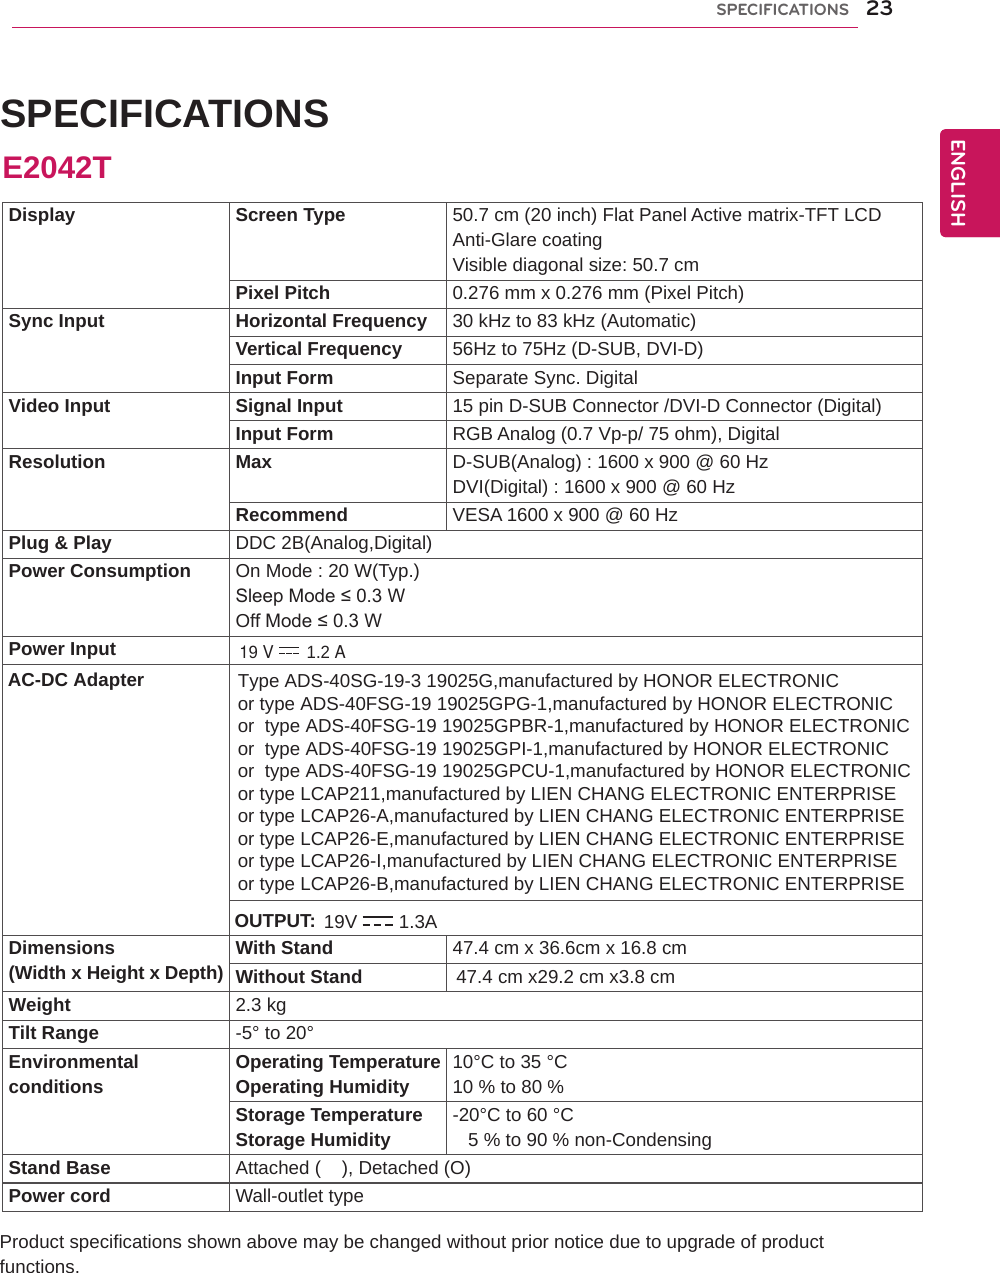 23ENGENGLISHSPECIFICATIONS SPECIFICATIONS Product specifications shown above may be changed without prior notice due to upgrade of product functions.Display Screen Type 50.7 cm (20 inch) Flat Panel Active matrix-TFT LCDAnti-Glare coatingVisible diagonal size: 50.7 cmPixel Pitch 0.276 mm x 0.276 mm (Pixel Pitch)Sync Input Horizontal Frequency 30 kHz to 83 kHz (Automatic)Vertical Frequency 56Hz to 75Hz (D-SUB, DVI-D)Input Form Separate Sync. DigitalVideo Input Signal Input 15 pin D-SUB Connector /DVI-D Connector (Digital)Input Form RGB Analog (0.7 Vp-p/ 75 ohm), DigitalResolution Max D-SUB(Analog) : 1600 x 900 @ 60 HzDVI(Digital) : 1600 x 900 @ 60 HzRecommend VESA 1600 x 900 @ 60 HzPlug &amp; Play DDC 2B(Analog,Digital)Power Consumption On Mode : 20 W(Typ.)Sleep Mode ≤ 0.3 W Off Mode ≤ 0.3 W Power InputDimensions(Width x Height x Depth) With Stand 47.4 cm x 36.6cm x 16.8 cmWithout Stand                  47.4 cm x29.2 cm x3.8 cmWeight 2.3 kgTilt Range -5° to 20°Environmentalconditions Operating TemperatureOperating Humidity 10°C to 35 °C10 % to 80 % Storage TemperatureStorage Humidity -20°C to 60 °C   5 % to 90 % non-CondensingStand Base Attached (    ), Detached (O)Power cord Wall-outlet typeE2042T19 V 1.2 A AC-DC Adapter Type ADS-40SG-19-3 19025G,manufactured by HONOR ELECTRONICor type ADS-40FSG-19 19025GPG-1,manufactured by HONOR ELECTRONICor  type ADS-40FSG-19 19025GPBR-1,manufactured by HONOR ELECTRONICor  type ADS-40FSG-19 19025GPI-1,manufactured by HONOR ELECTRONICor  type ADS-40FSG-19 19025GPCU-1,manufactured by HONOR ELECTRONICor type LCAP211,manufactured by LIEN CHANG ELECTRONIC ENTERPRISEor type LCAP26-A,manufactured by LIEN CHANG ELECTRONIC ENTERPRISEor type LCAP26-E,manufactured by LIEN CHANG ELECTRONIC ENTERPRISEor type LCAP26-I,manufactured by LIEN CHANG ELECTRONIC ENTERPRISEor type LCAP26-B,manufactured by LIEN CHANG ELECTRONIC ENTERPRISE OUTPUT: 19V 1.3A